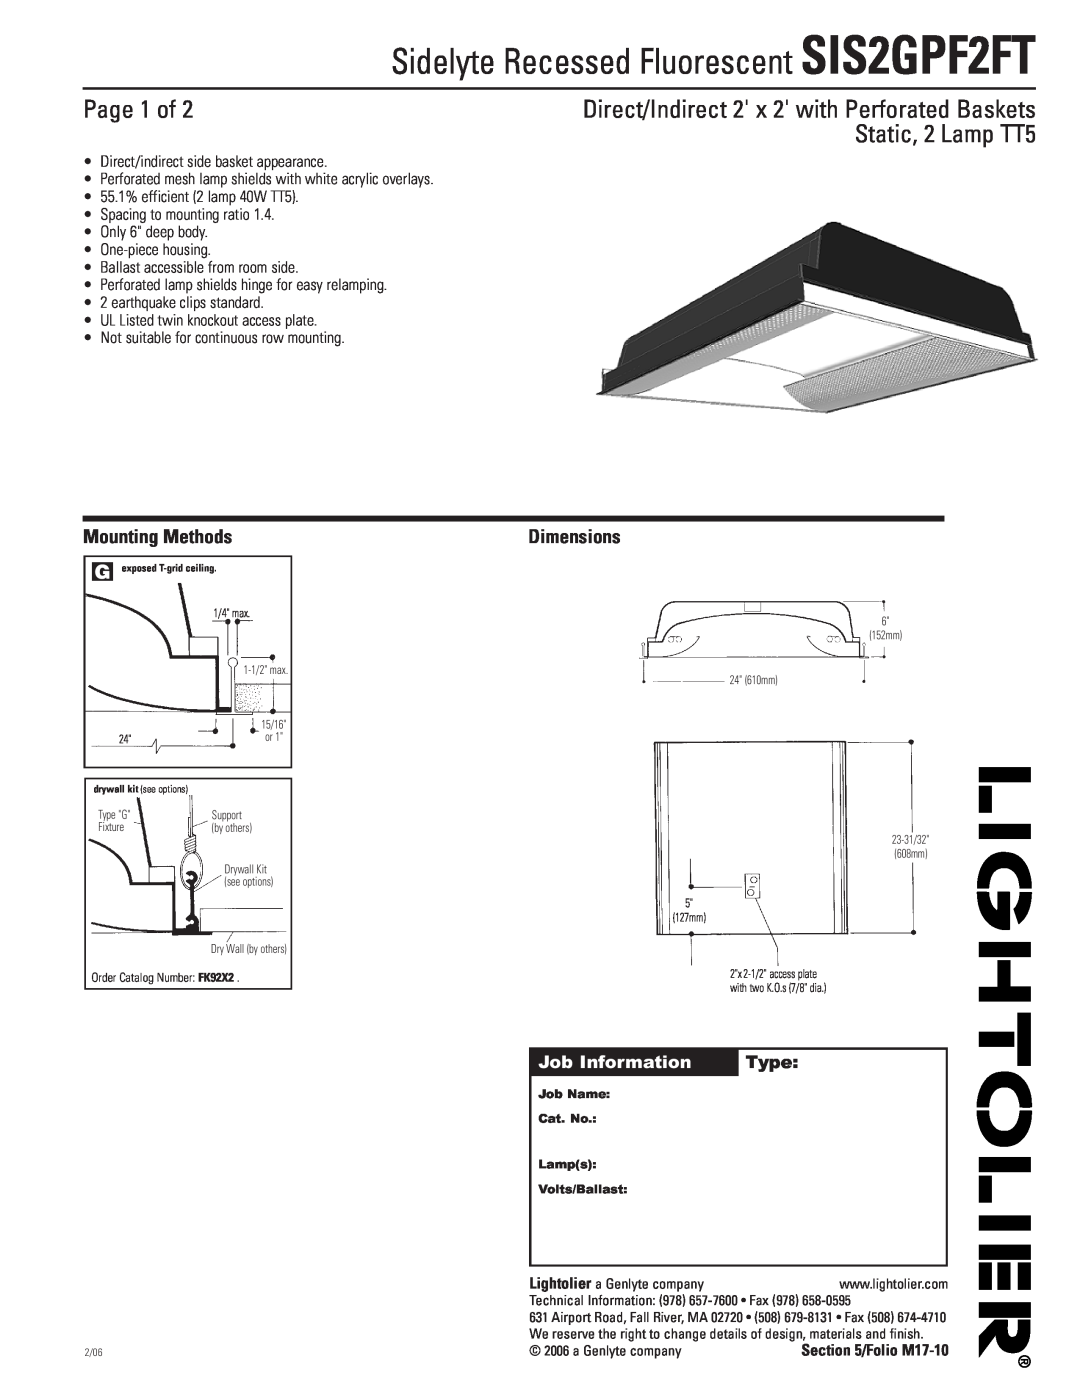 Lightolier SIS2GPF2FT dimensions Page 1 of, Direct/Indirect 2 x 2 with Perforated Baskets, Static, 2 Lamp TT5, Dimensions 